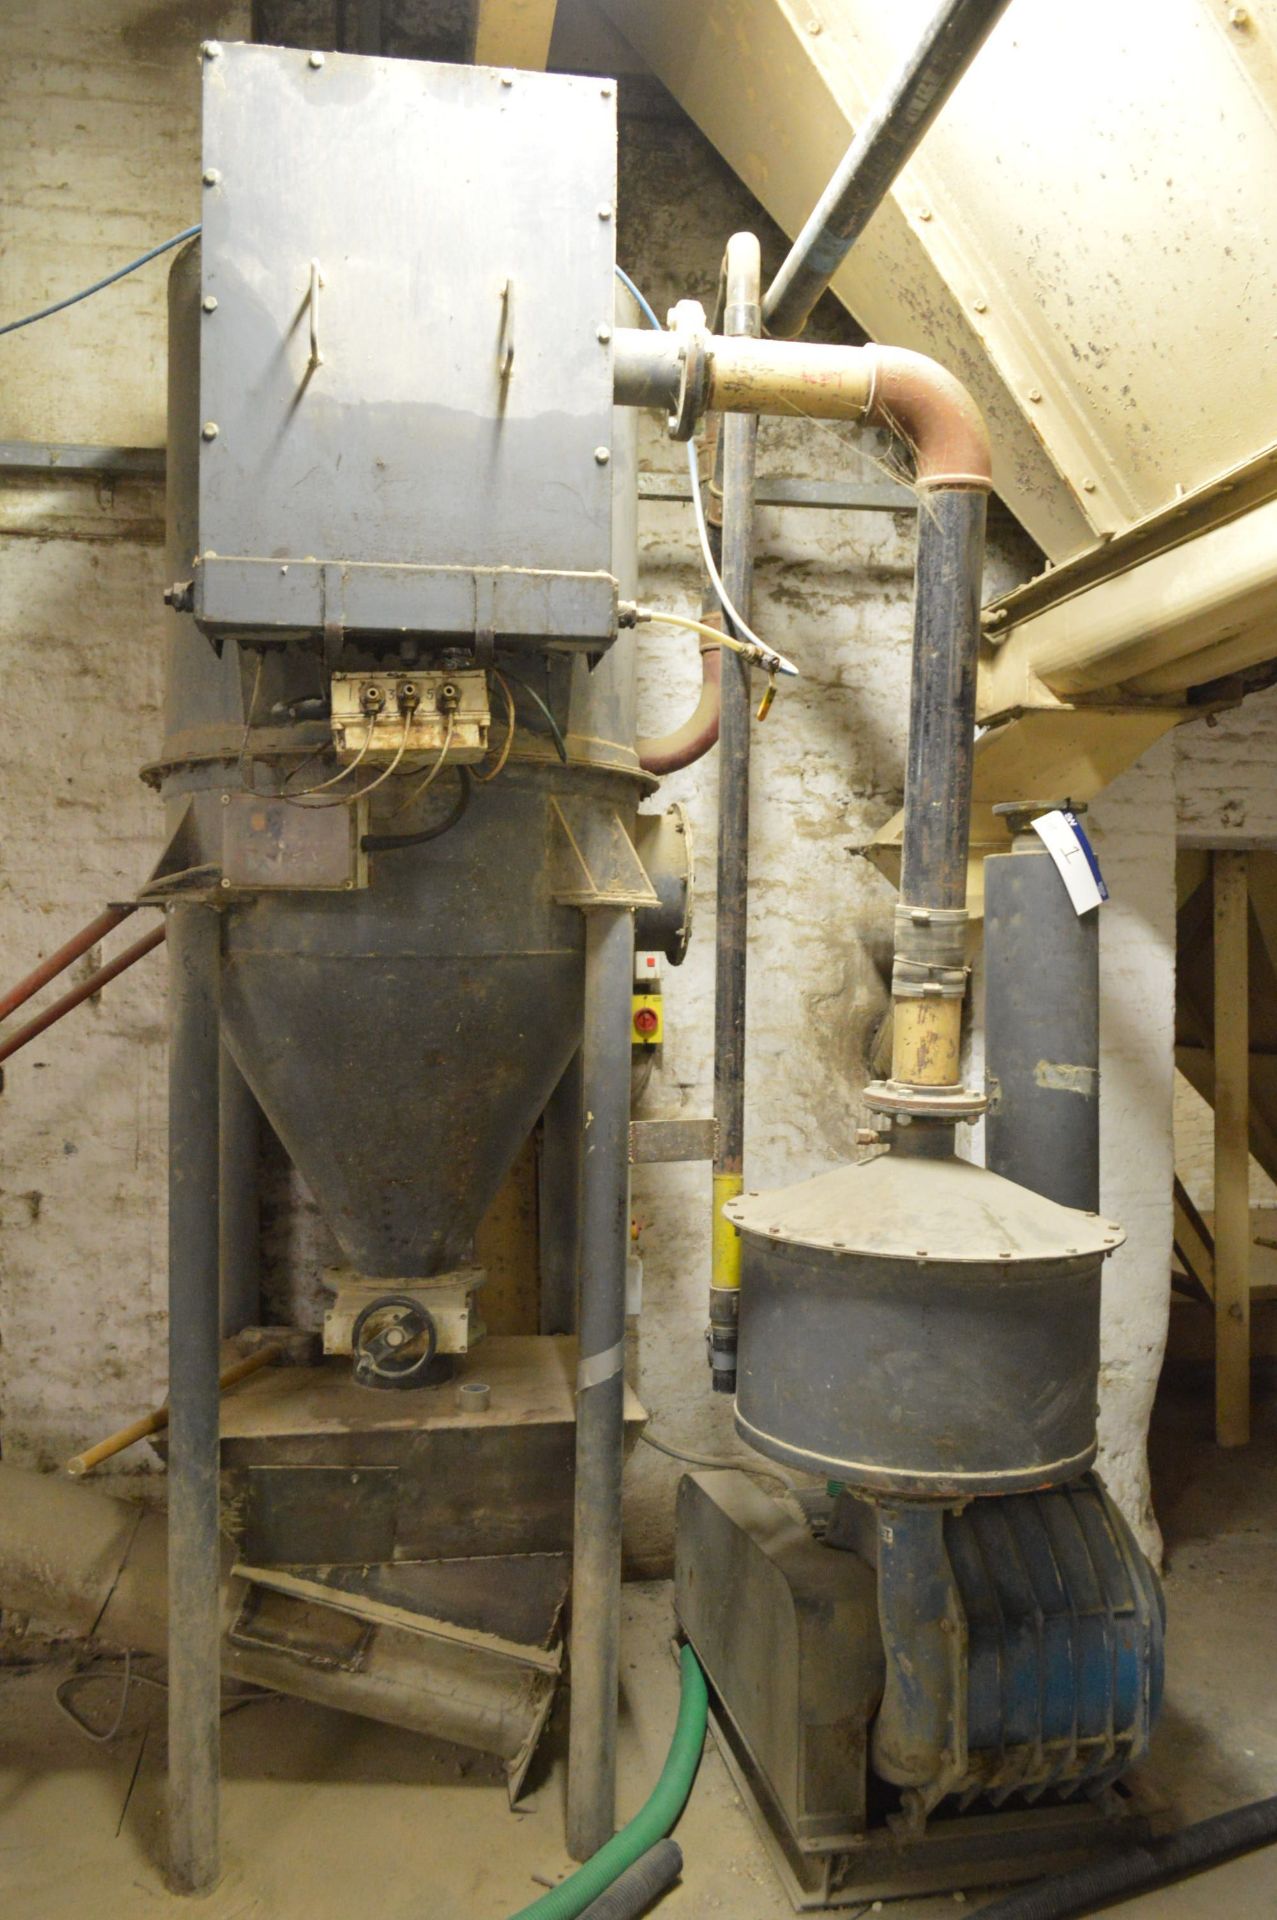 MILL CENTRAL VACUUM SYSTEM, with vacuum, filted11kW electric motor, receiver unit fitted filter, - Bild 3 aus 4